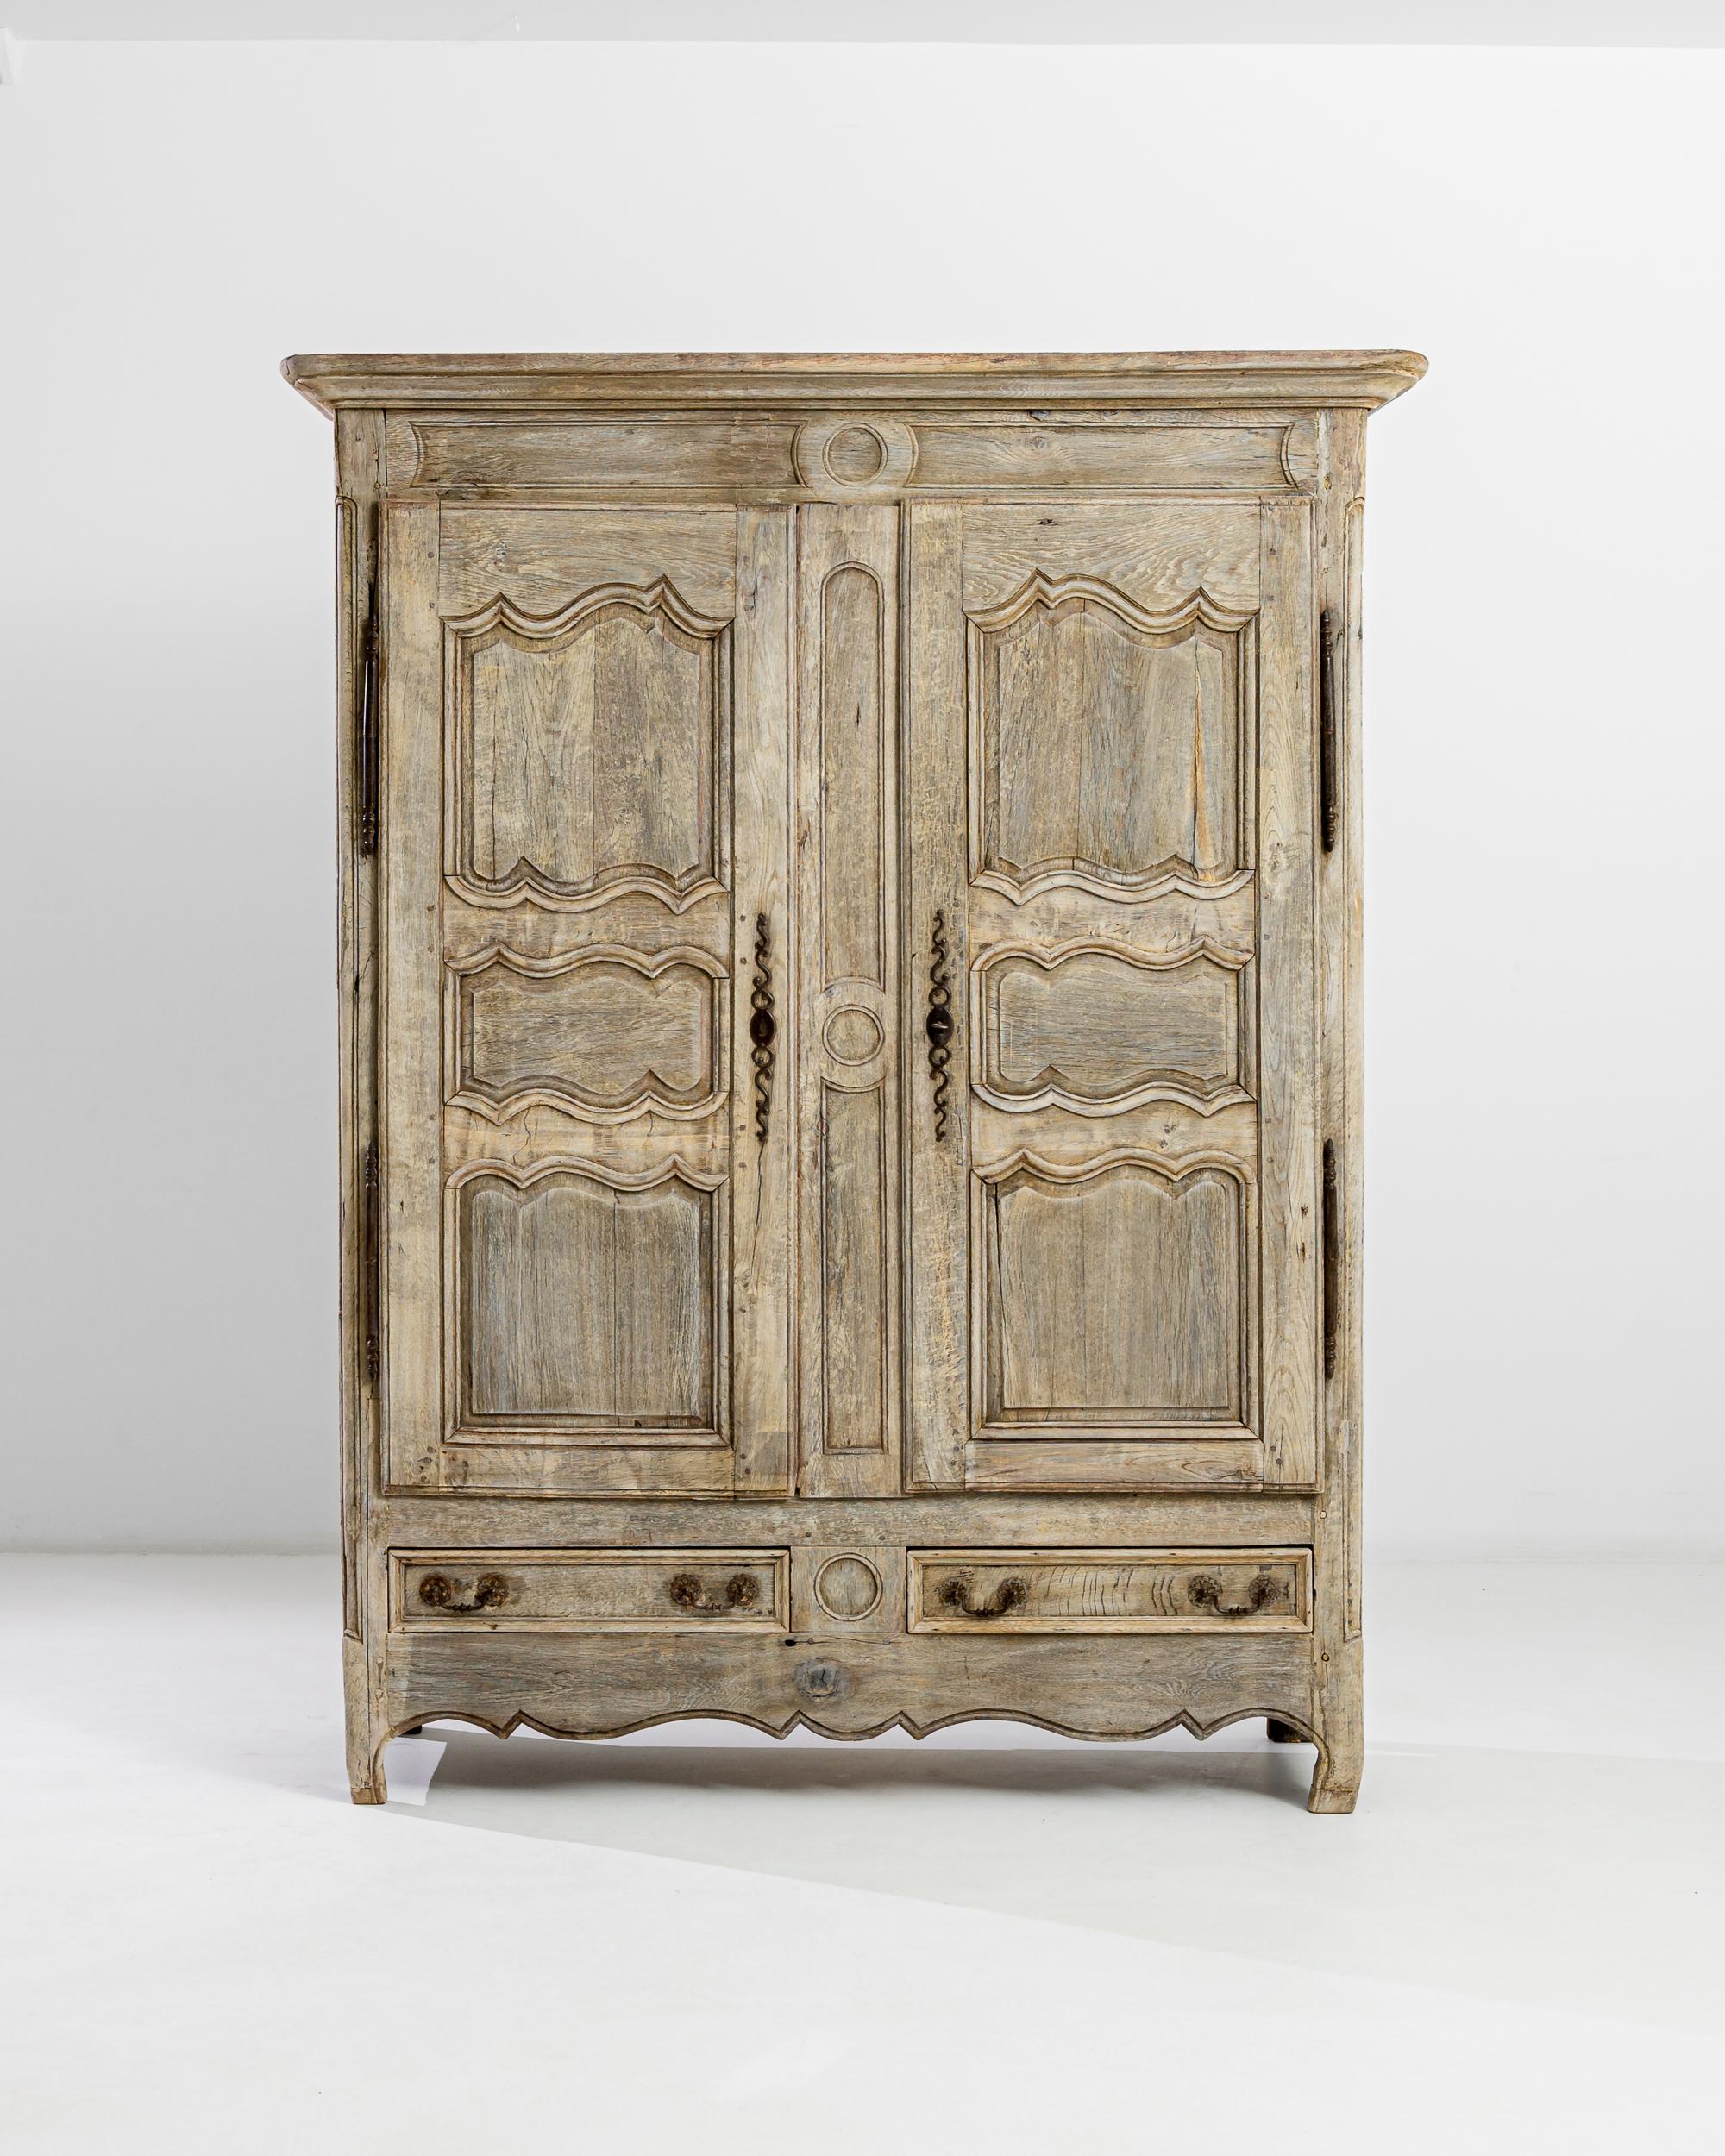 A 19th century oak armoire produced in France, this majestic wooden chest marries the picturesque to the elegant. Crowned by a molded top, the craftily carved front stands on tiptoed hooves, embellished by a scalloped apron. The ample four shelf